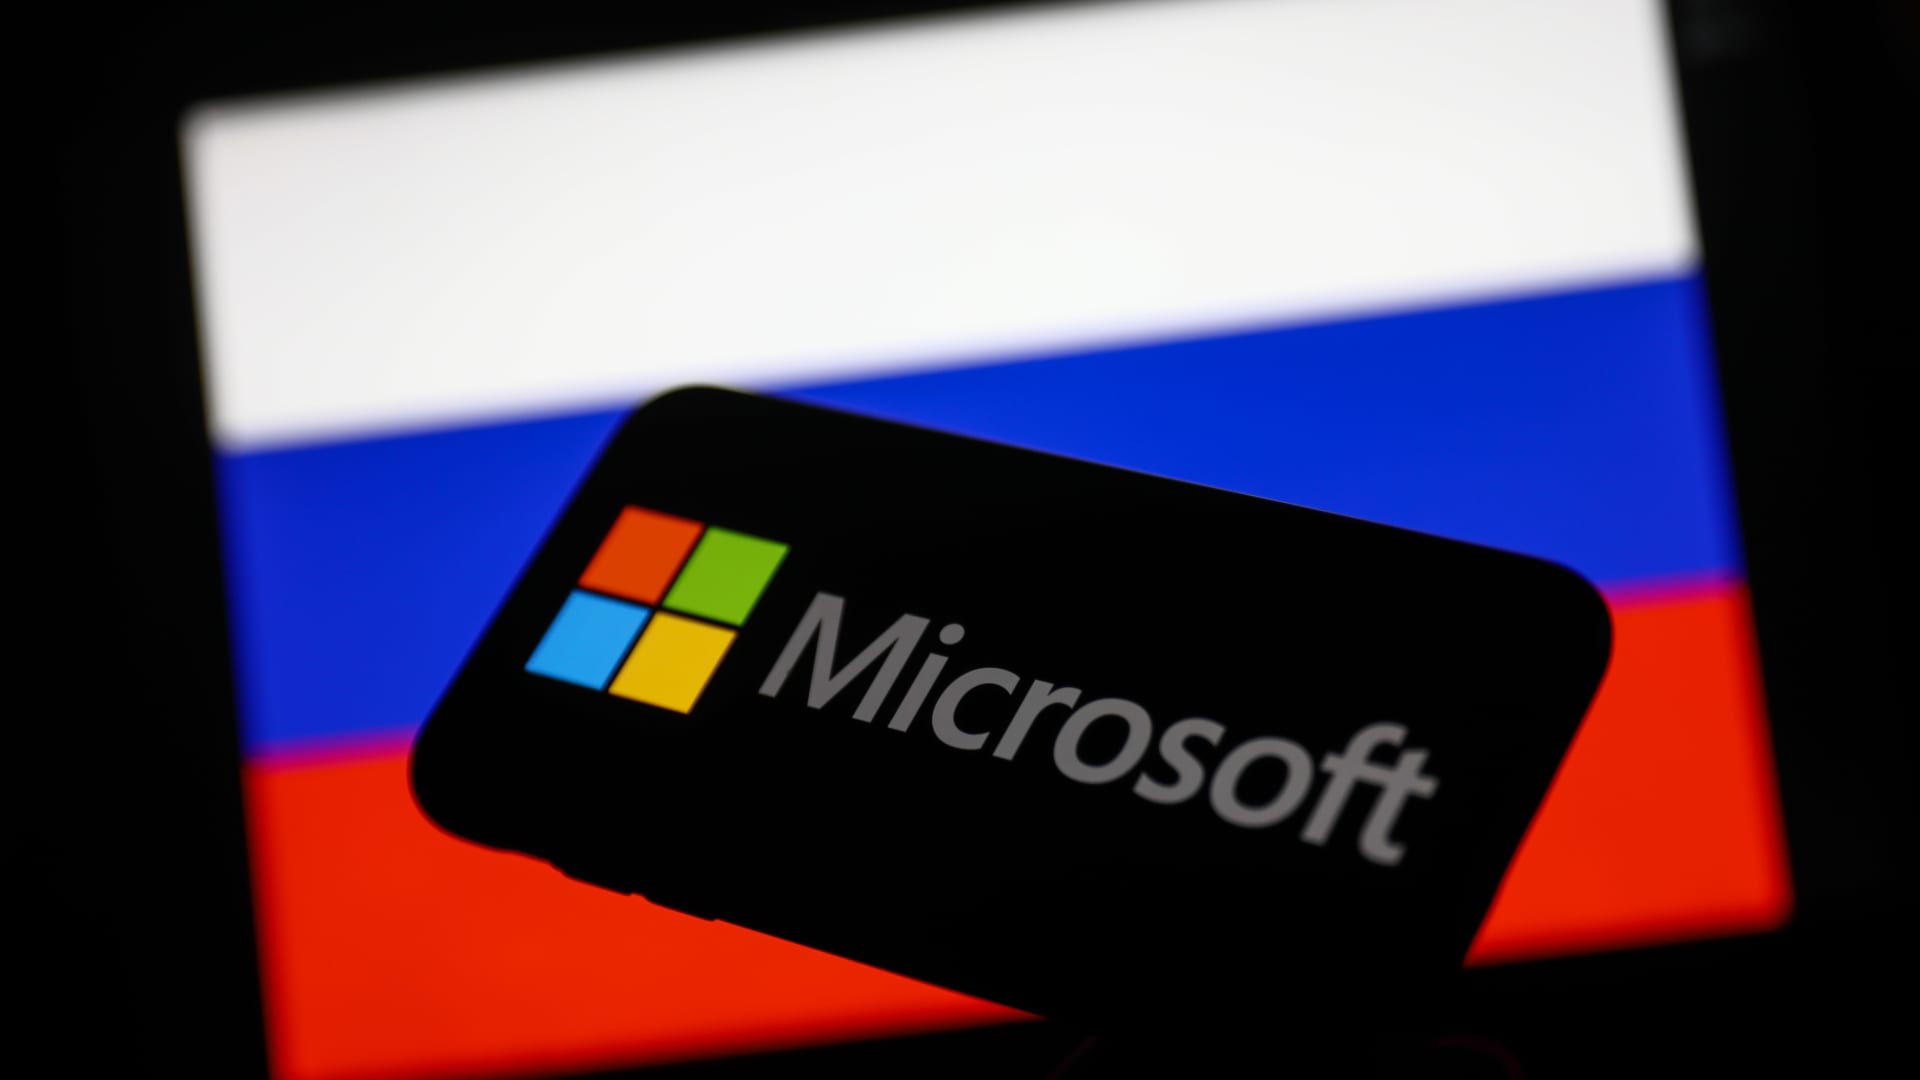 Microsoft scales down Russia operations due to Ukraine crisis